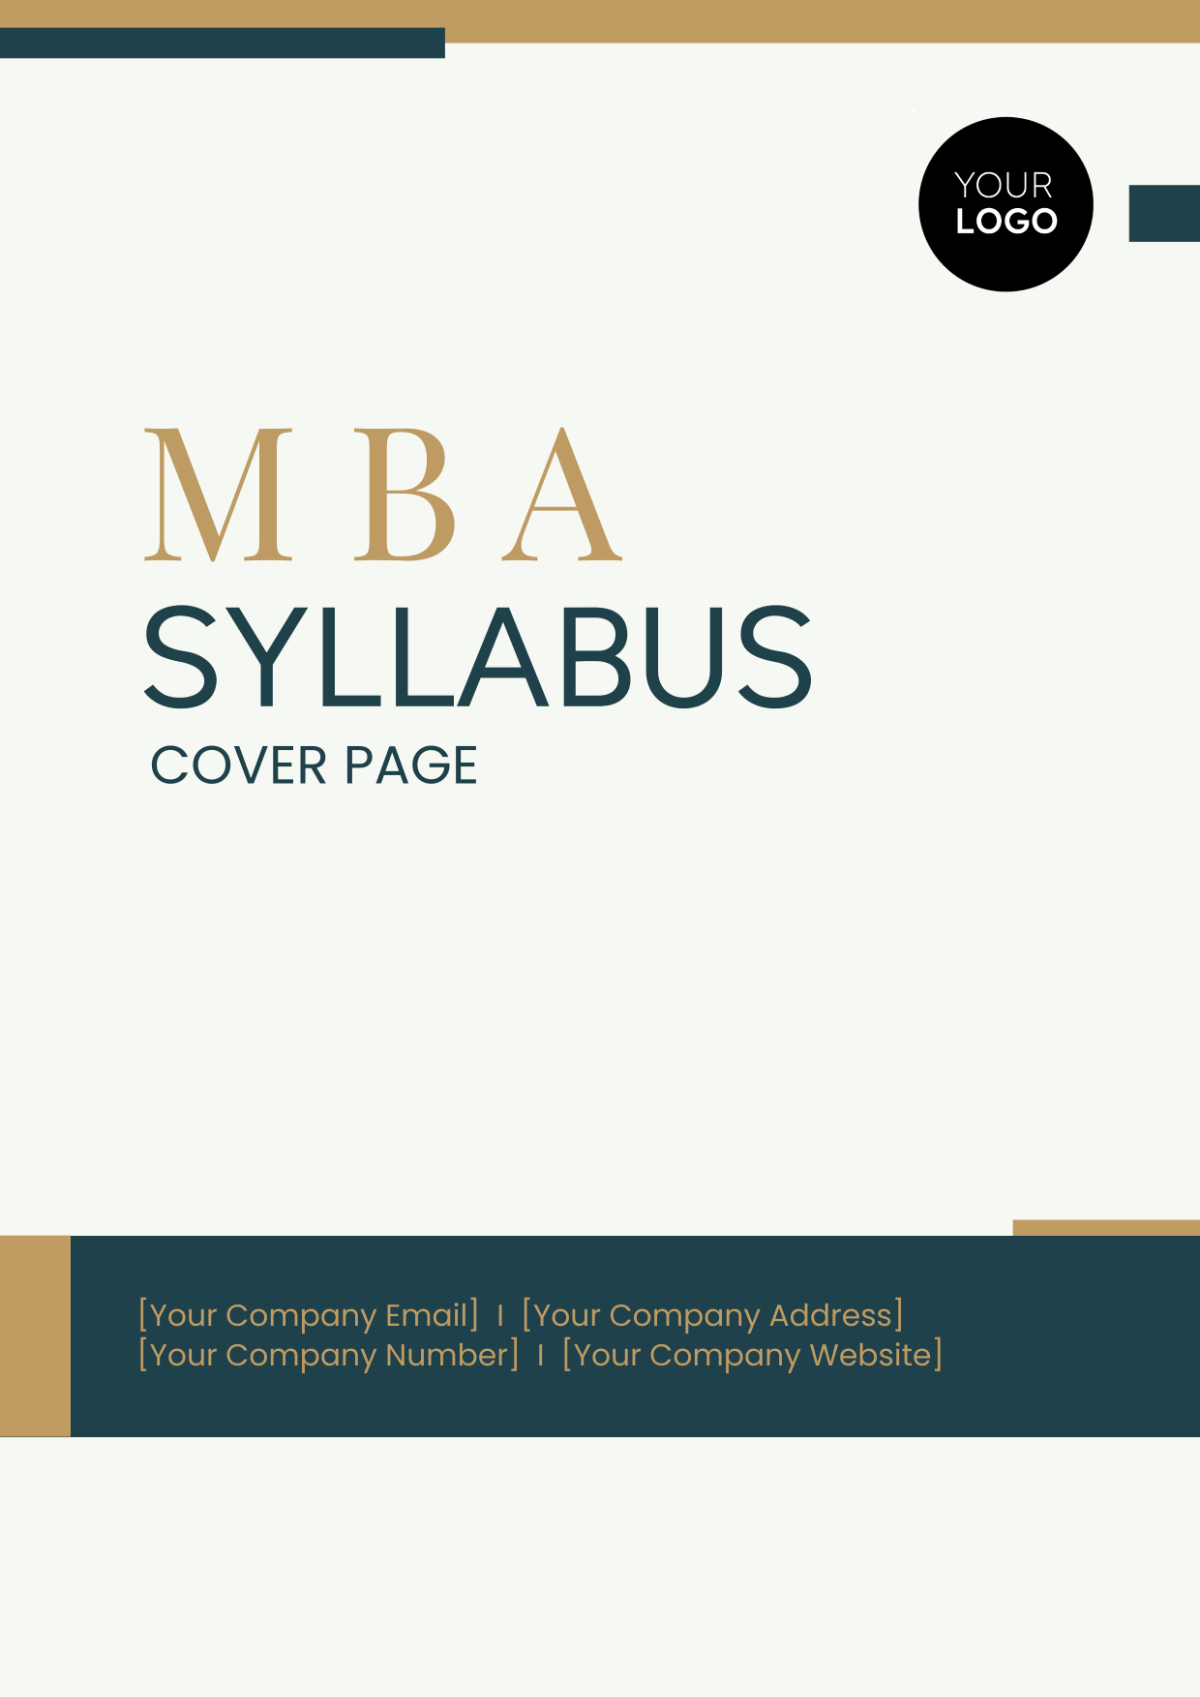 MBA Syllabus Cover Page